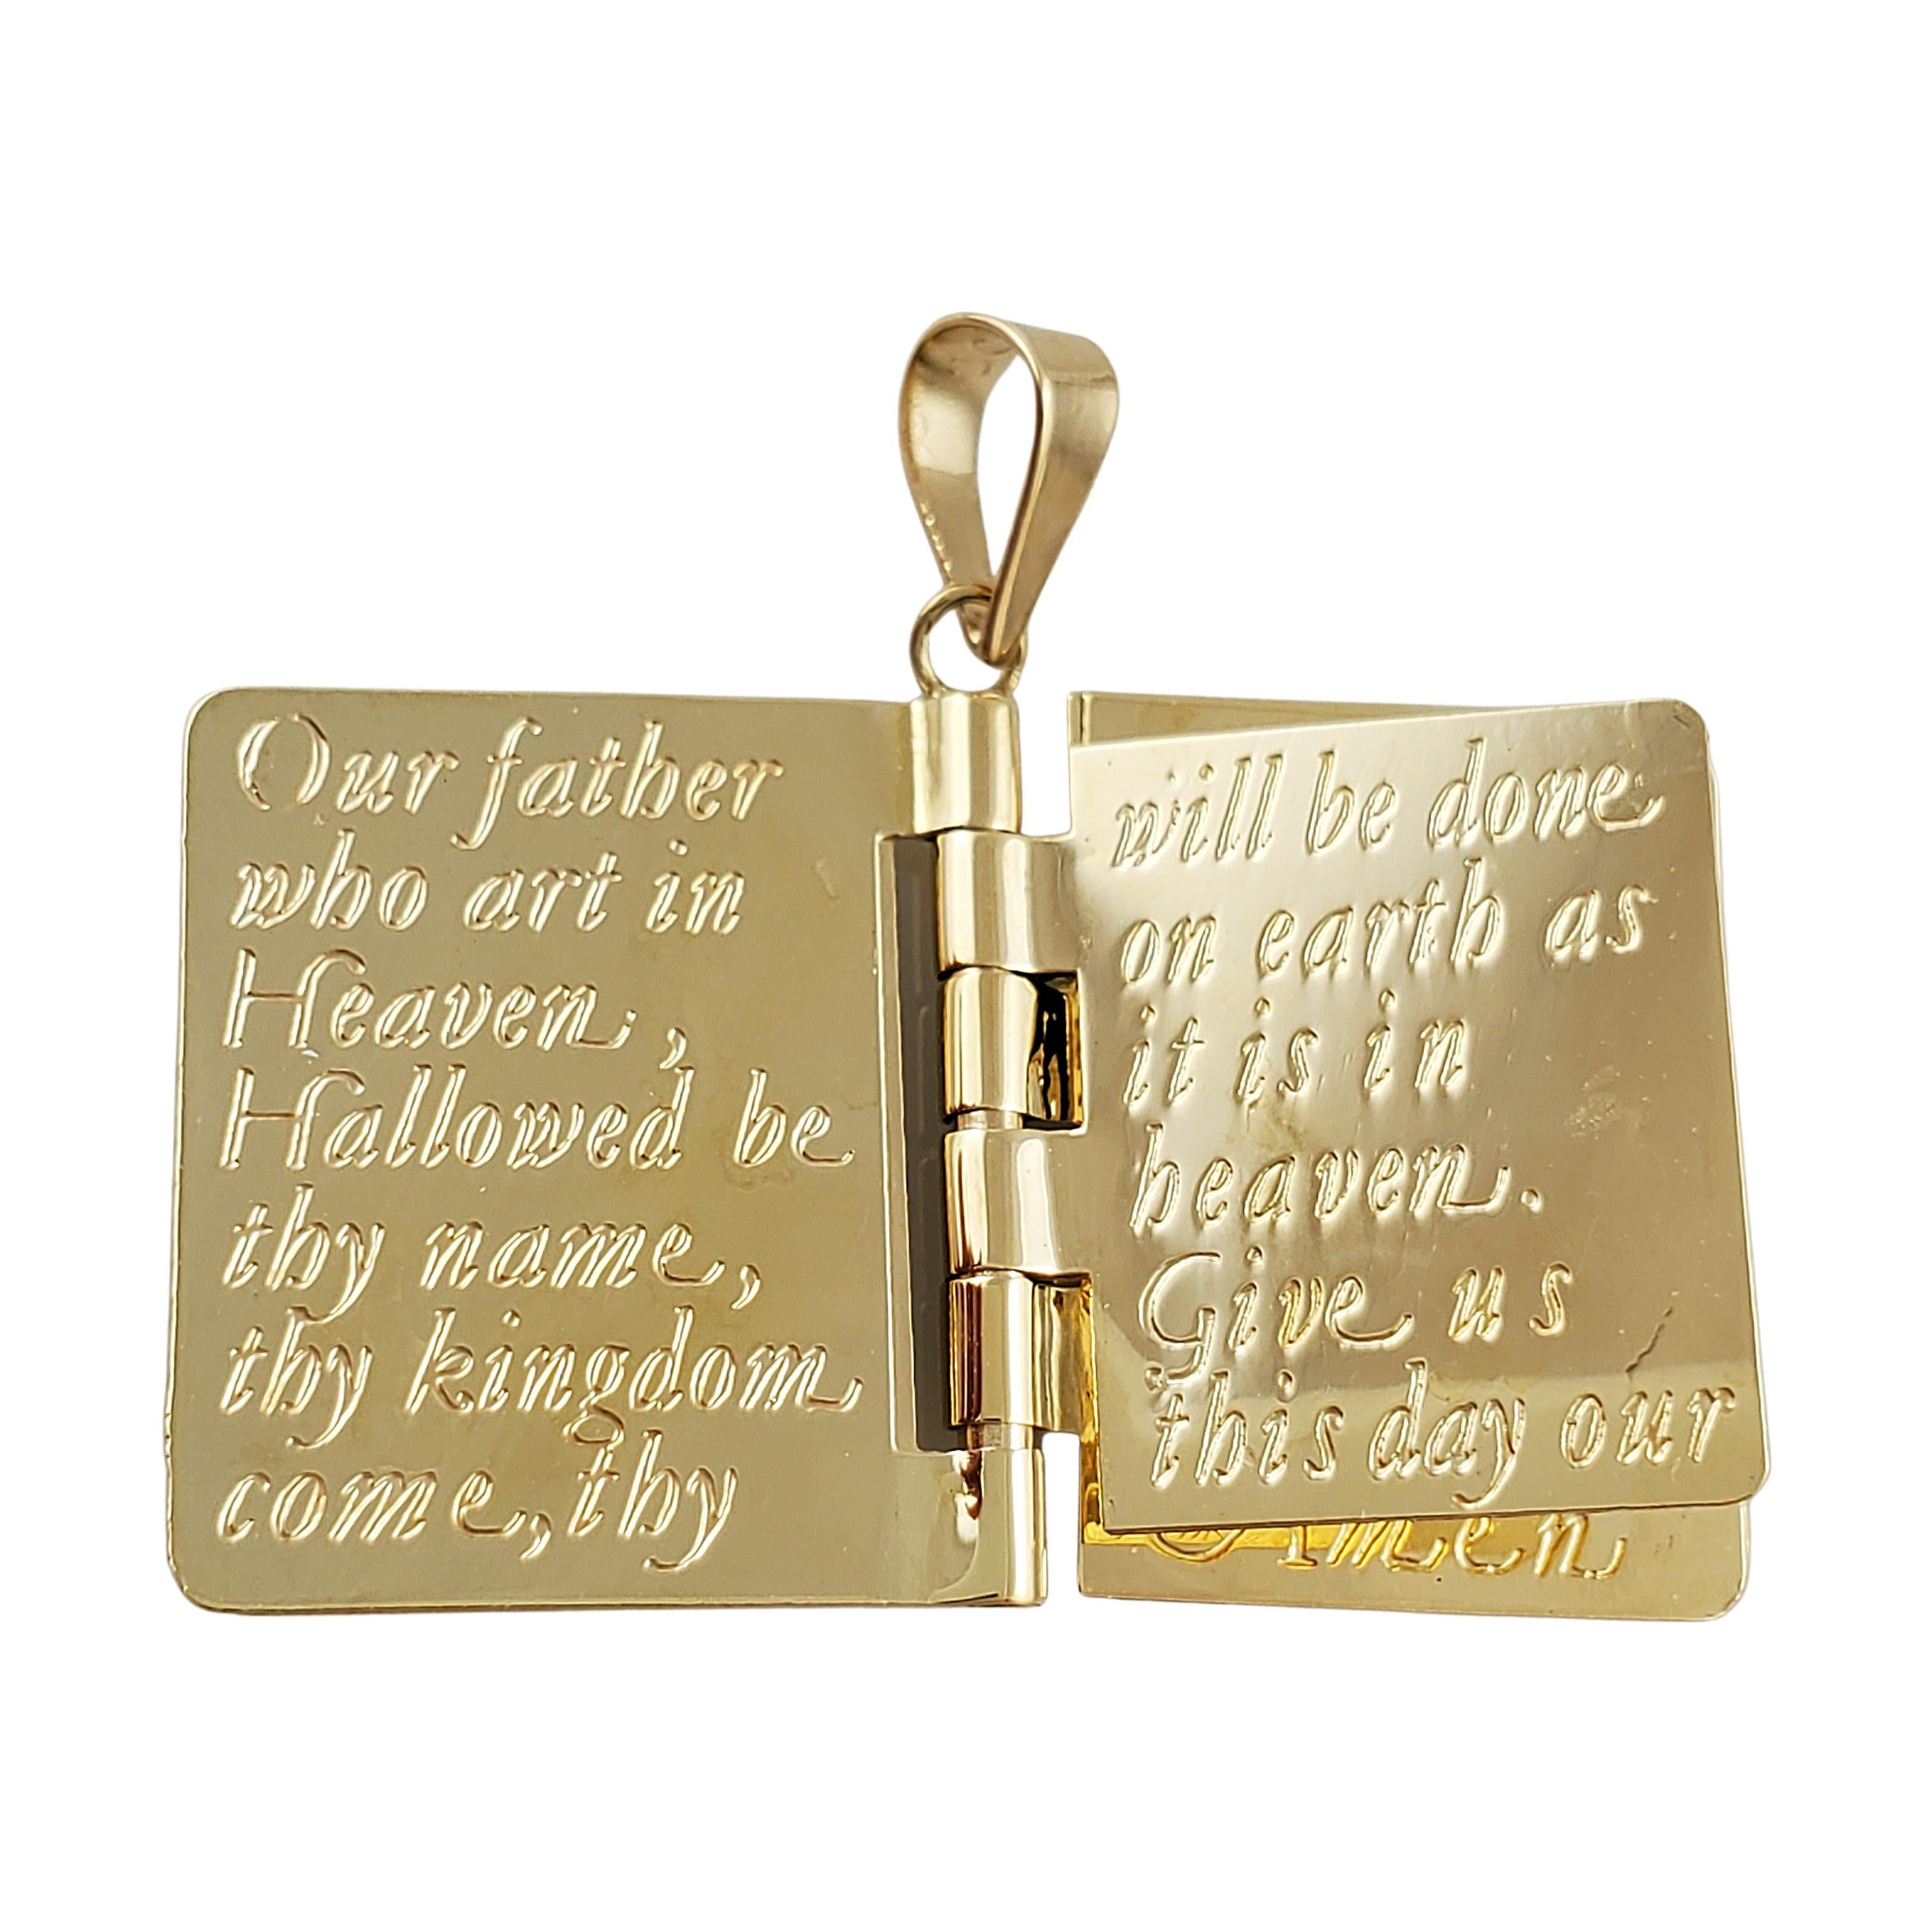 Vintage 14K Yellow Gold Prayer Book Charm

Gorgeous prayer book charm includes 3 mechanical pages which has the Lords Prayer 'Our Father' engraved on them. On the front of this prayer book has a beautifully designed cross and its all made in 14k